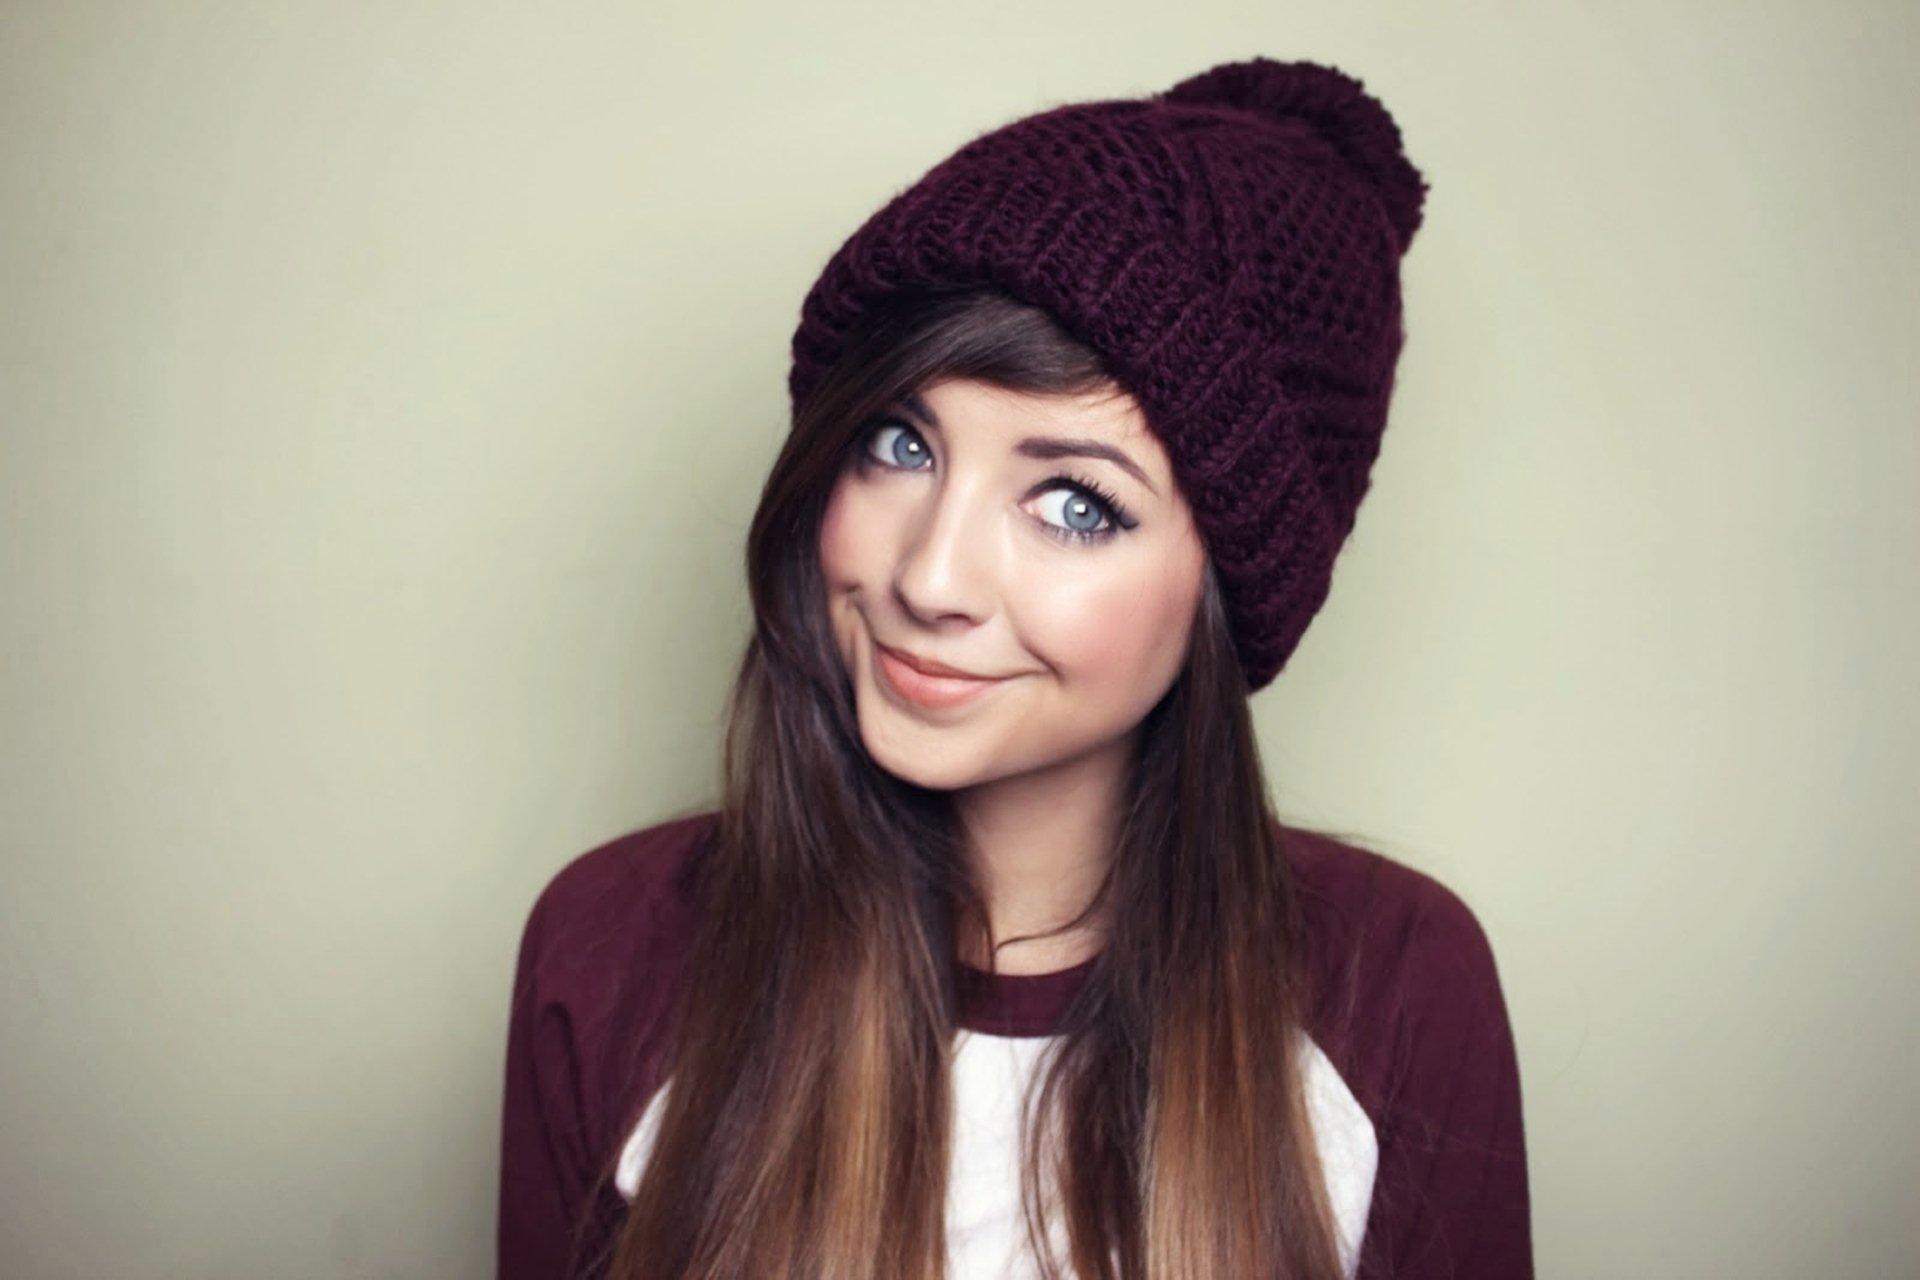 55+ Hot Pictures Of Zoe Sugg Are Just Too Hot To Handle | Best Of Comic Books